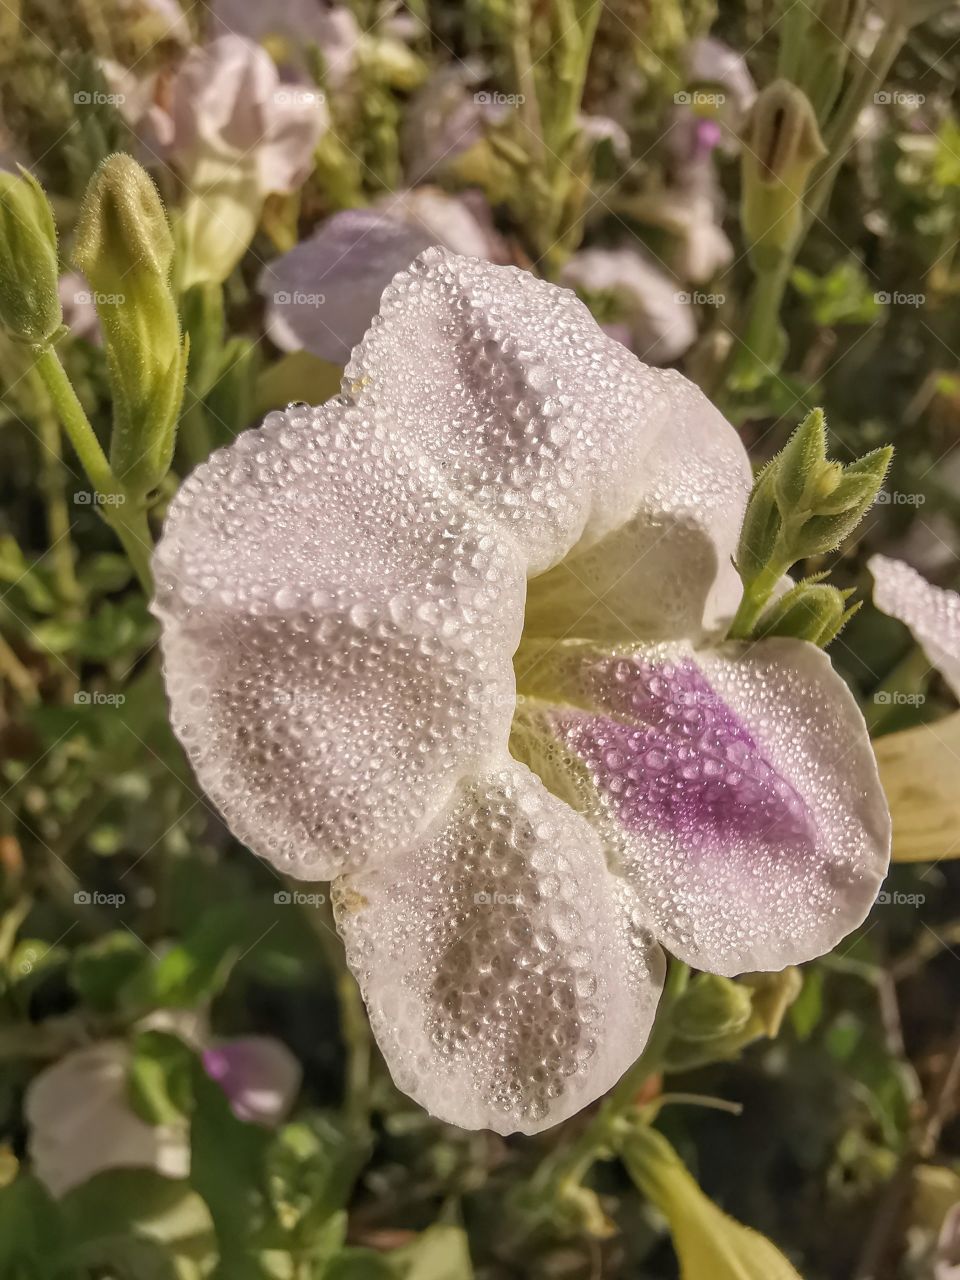 Drops of dew on the white flower